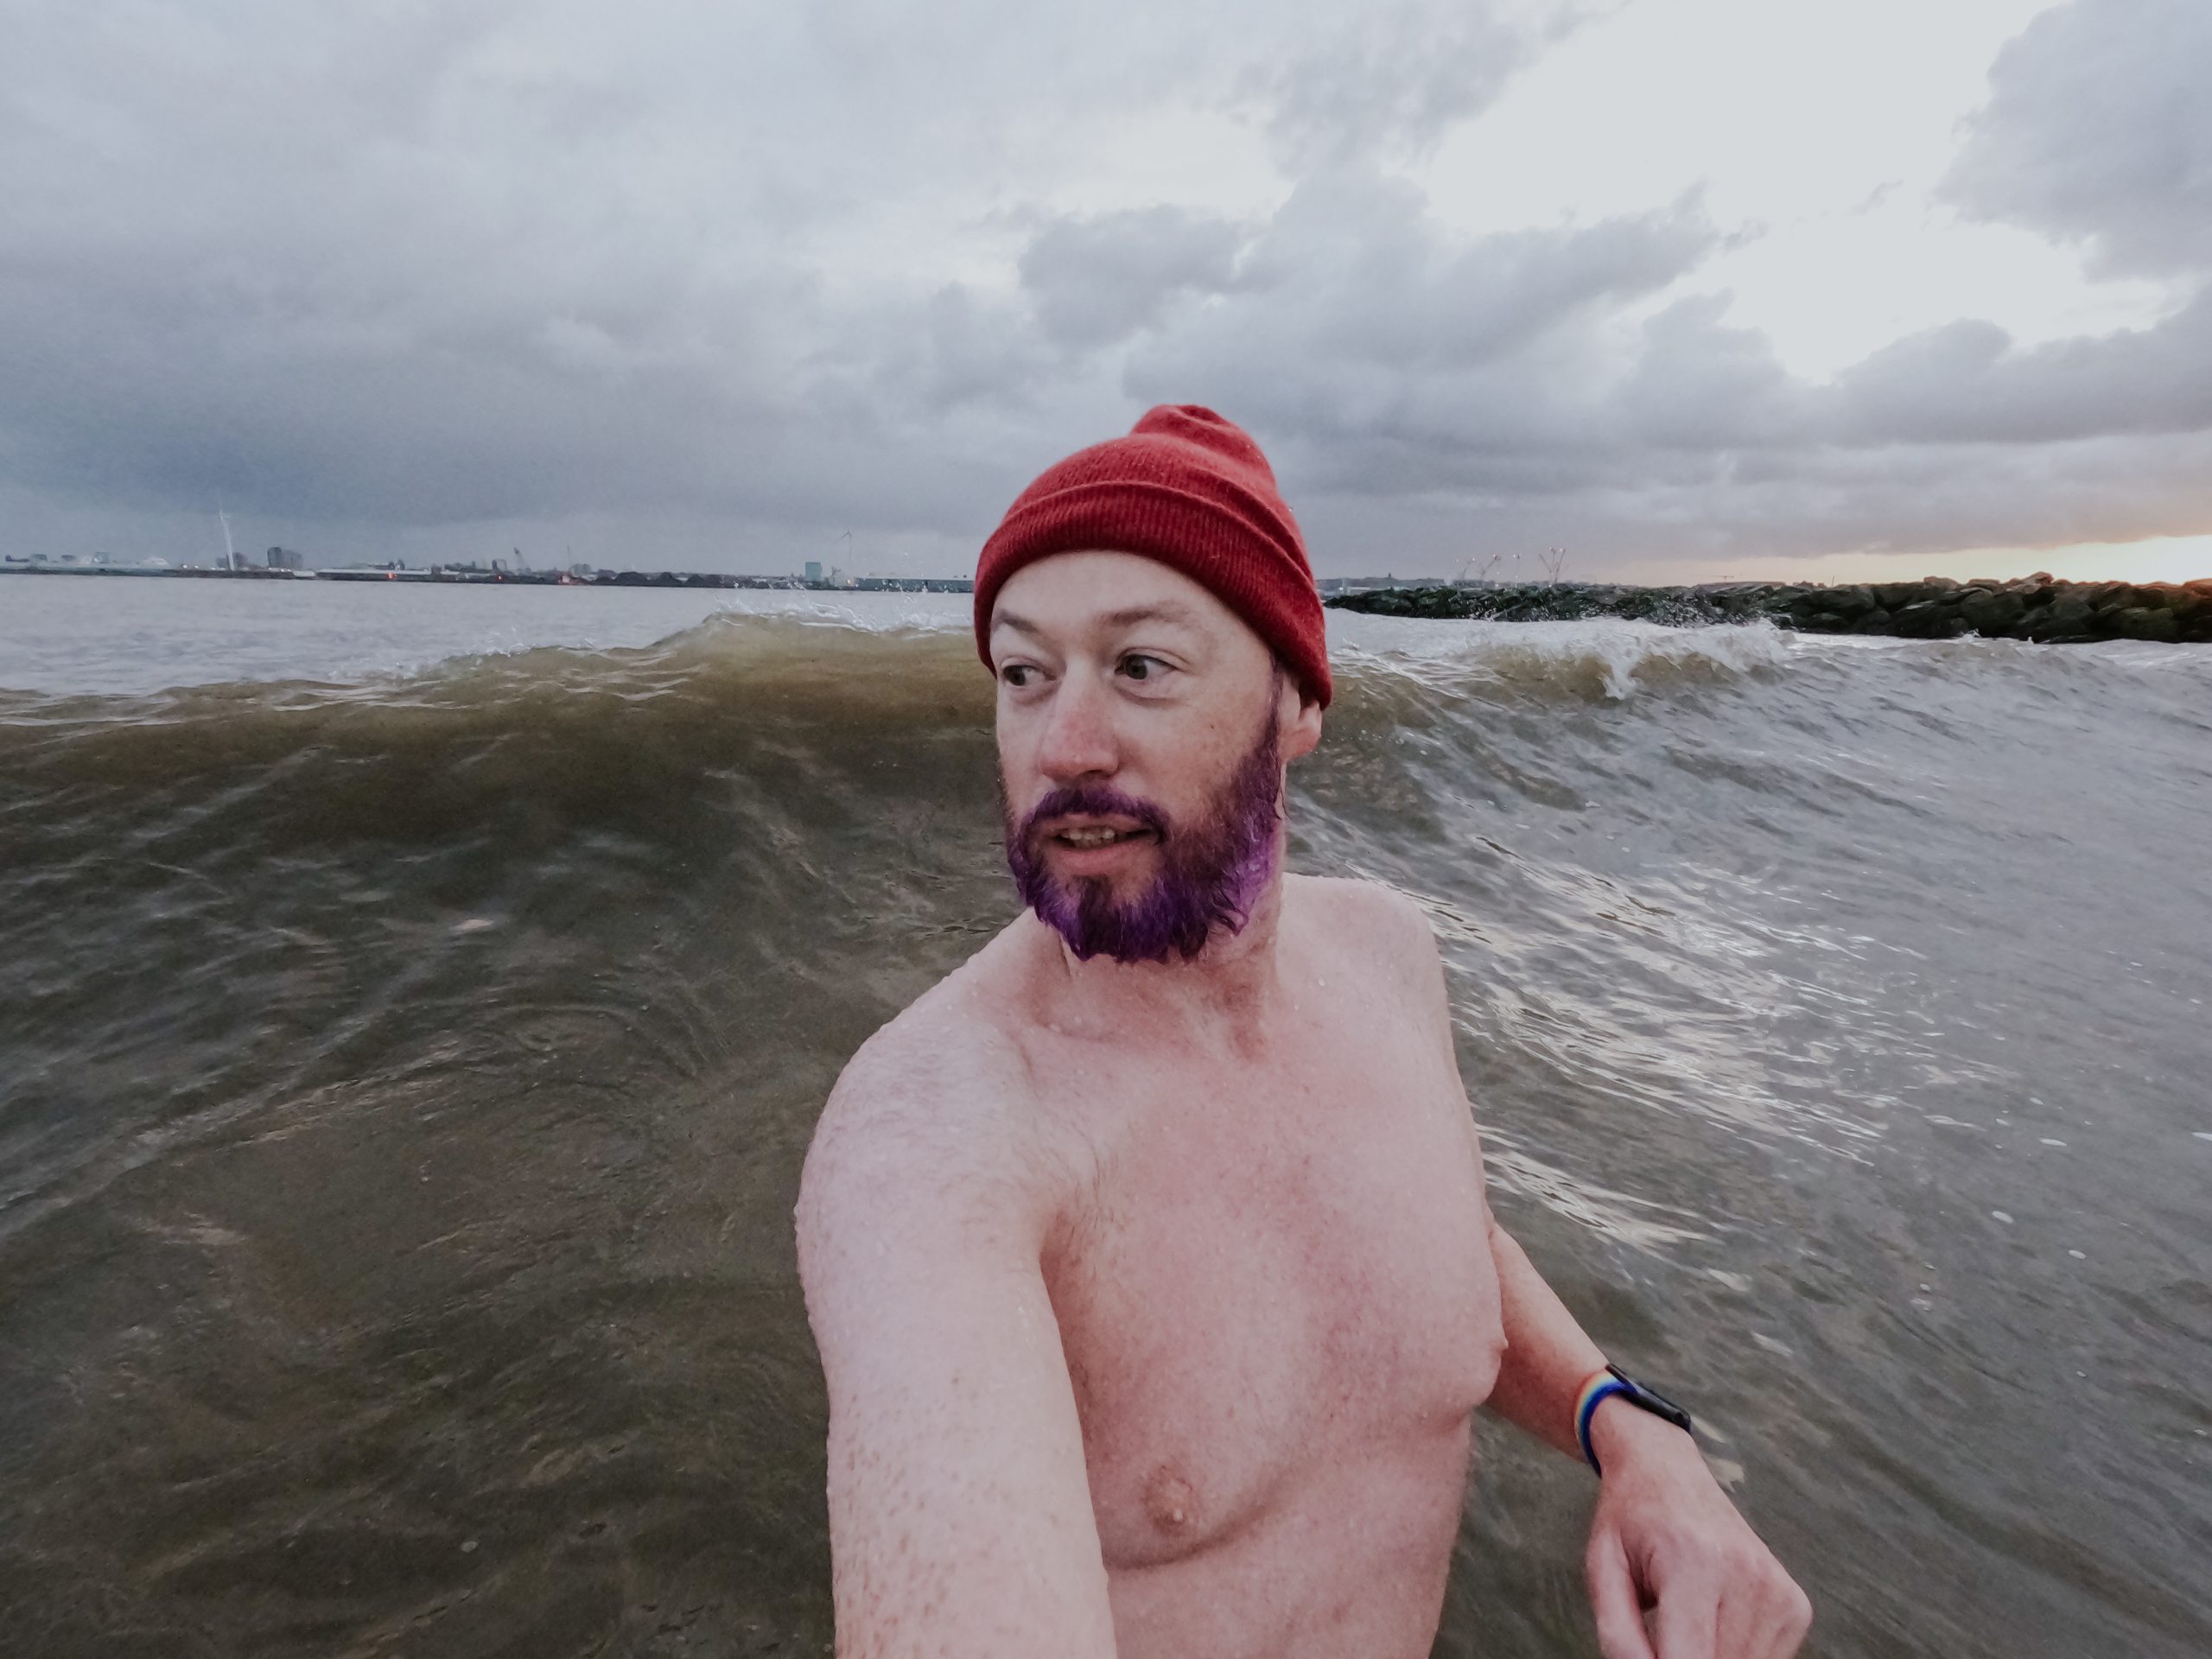 Non-binary person with a dark purple beard and a red beanie hat on glances back at a big wave closing in on them.